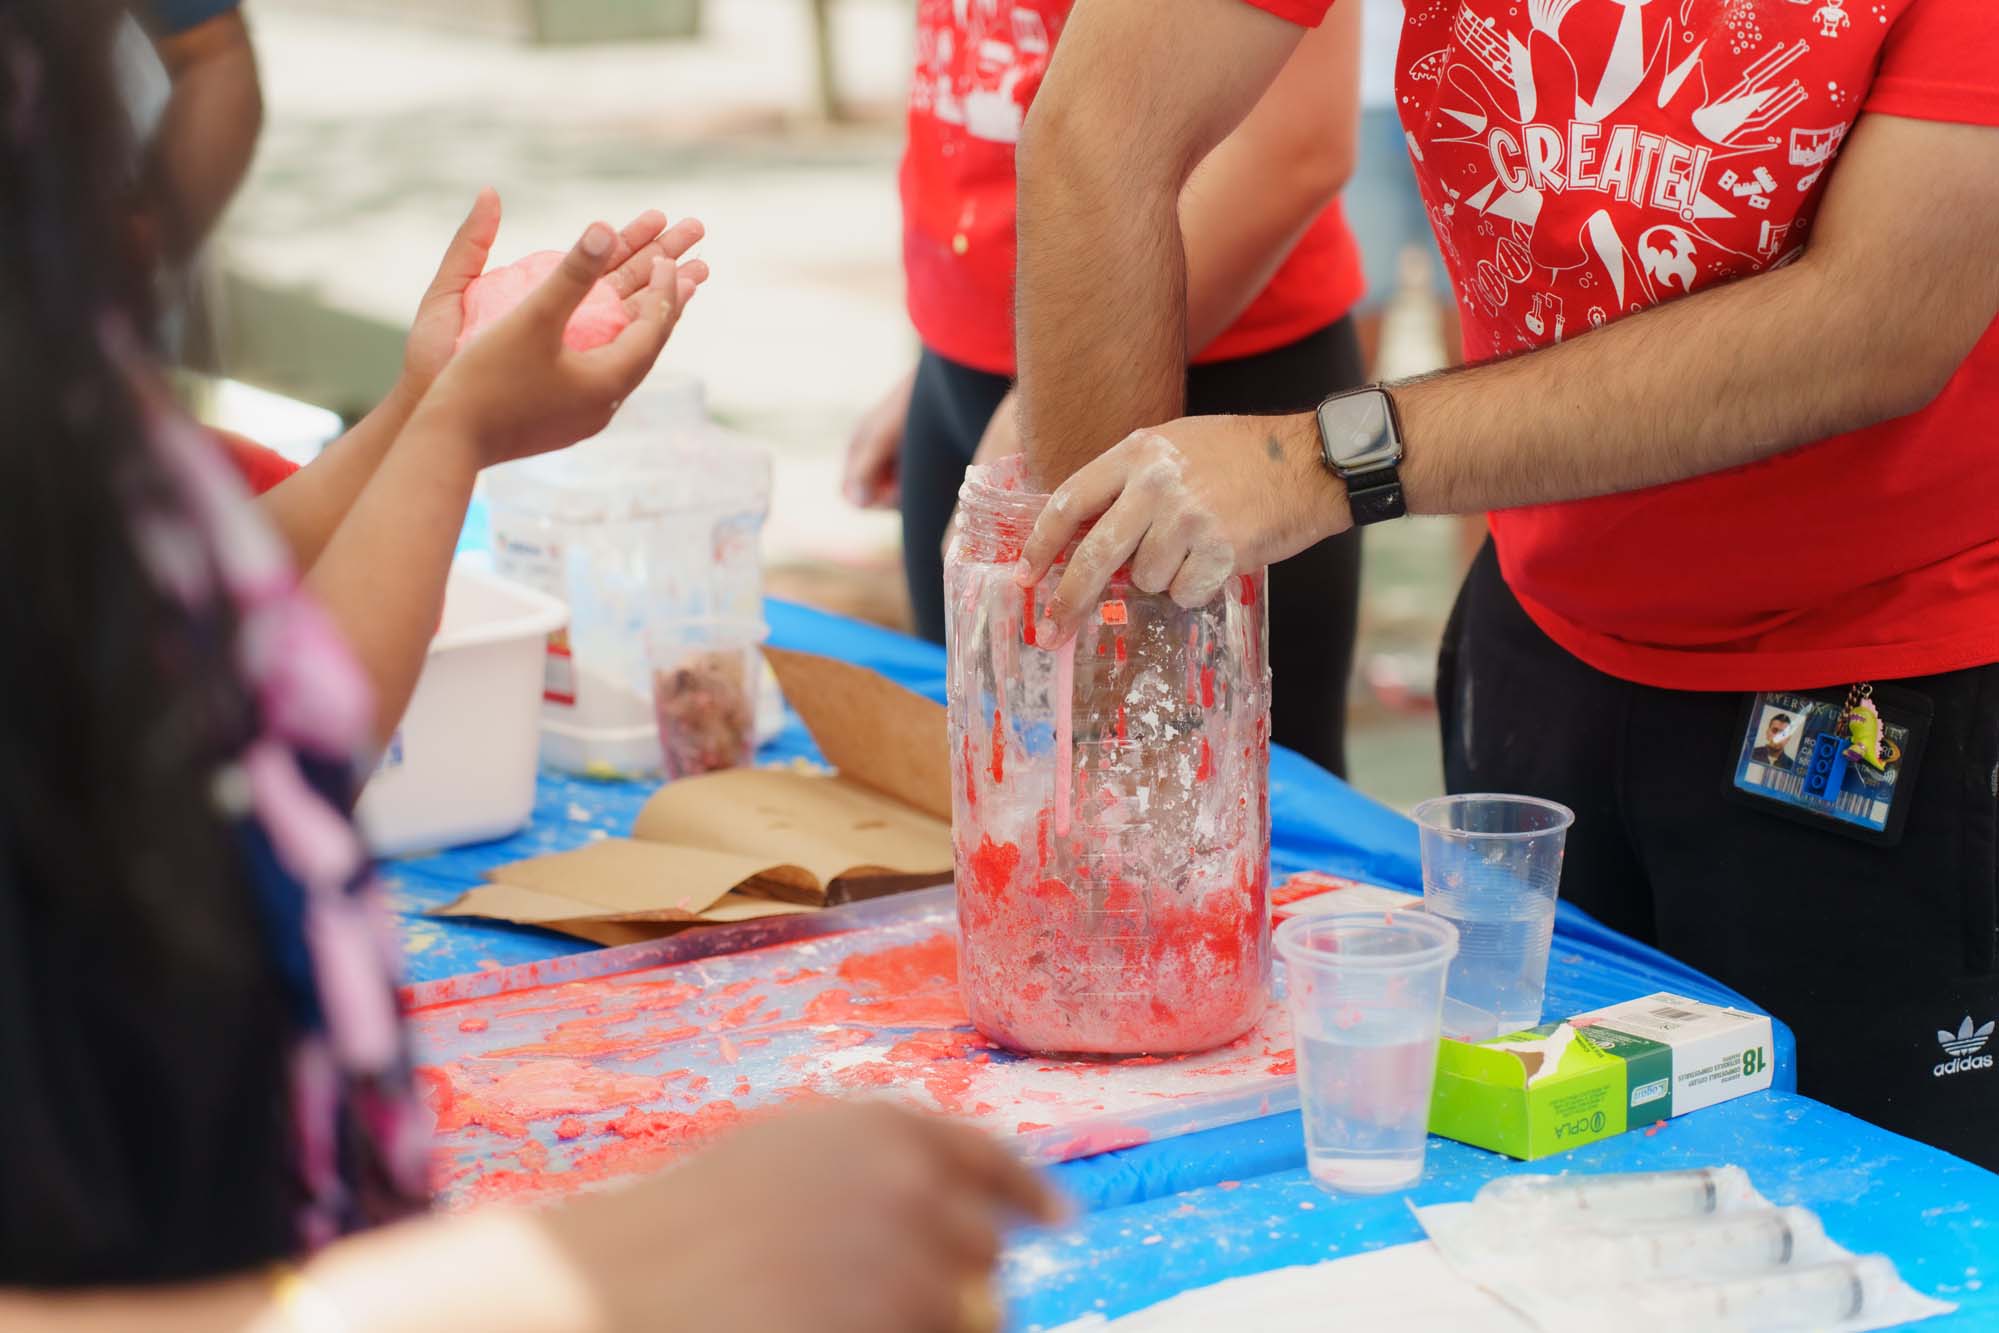 A volunteer mixing cornstarch, water and red colouring to make red slime in front of participants at the Food Science Now booth.